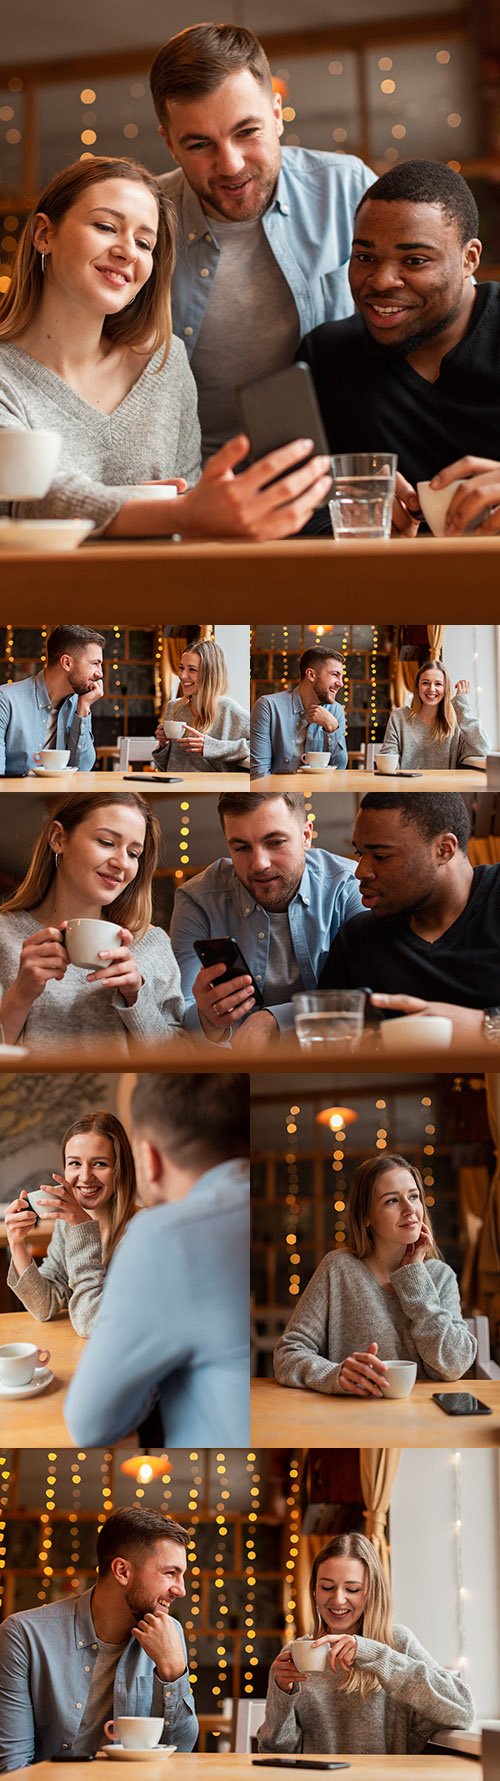 Young friends at restaurant table take selfies